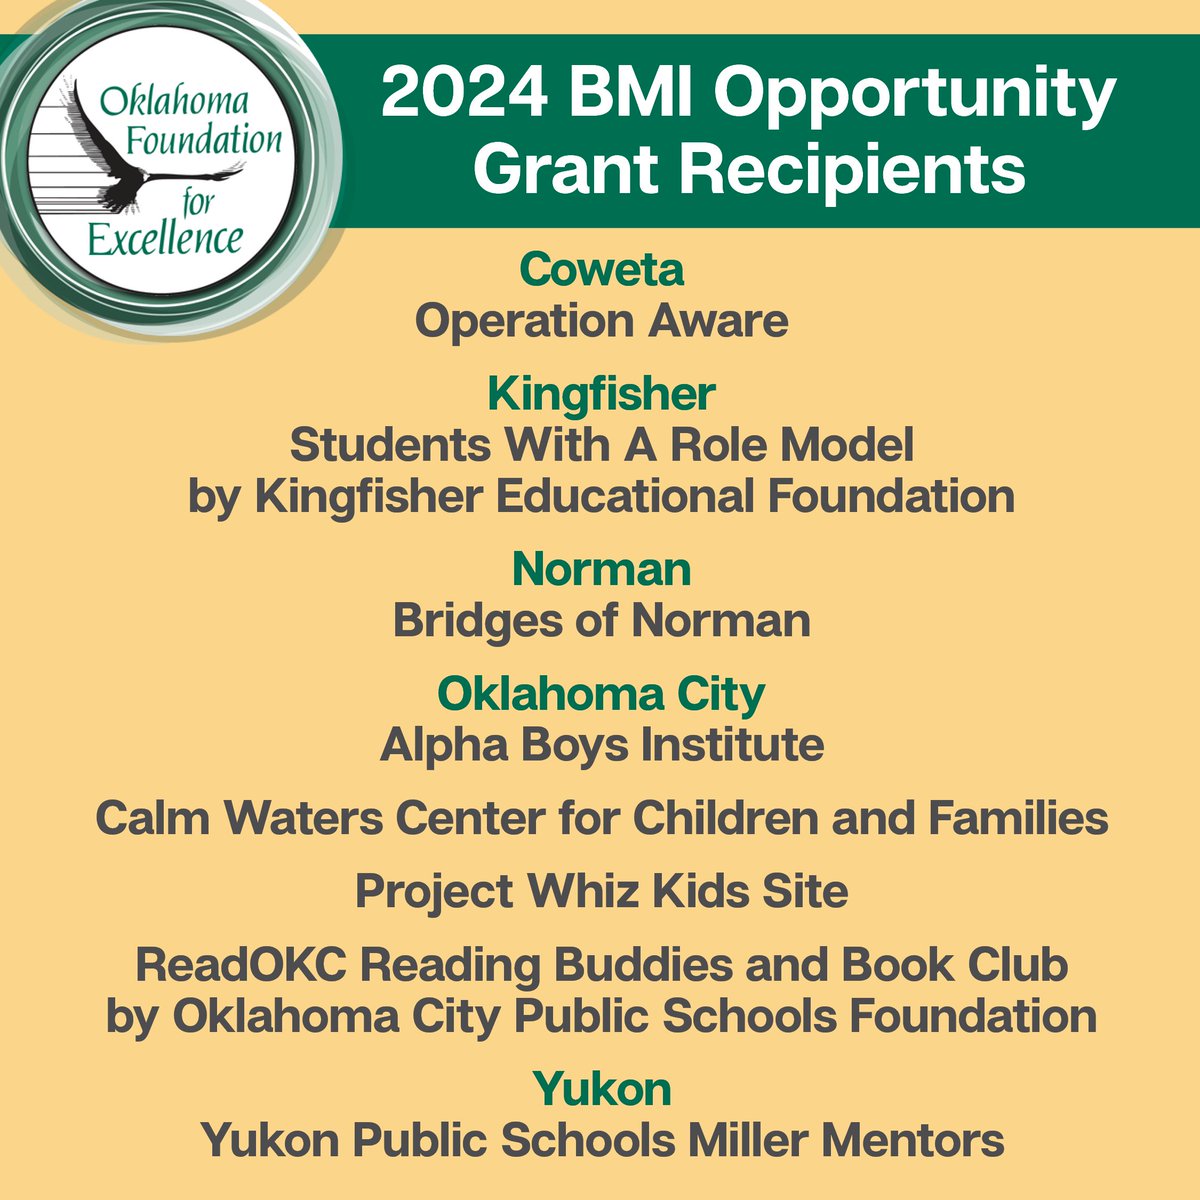 Mentoring programs in Coweta, Kingfisher, Norman, Oklahoma City and Yukon are recipients of the Oklahoma Foundation for Excellence’s 2024 Boren Mentoring Initiative Opportunity Grants. Learn more about the 2024 recipients at ow.ly/V3we50R4u7u #oklaed